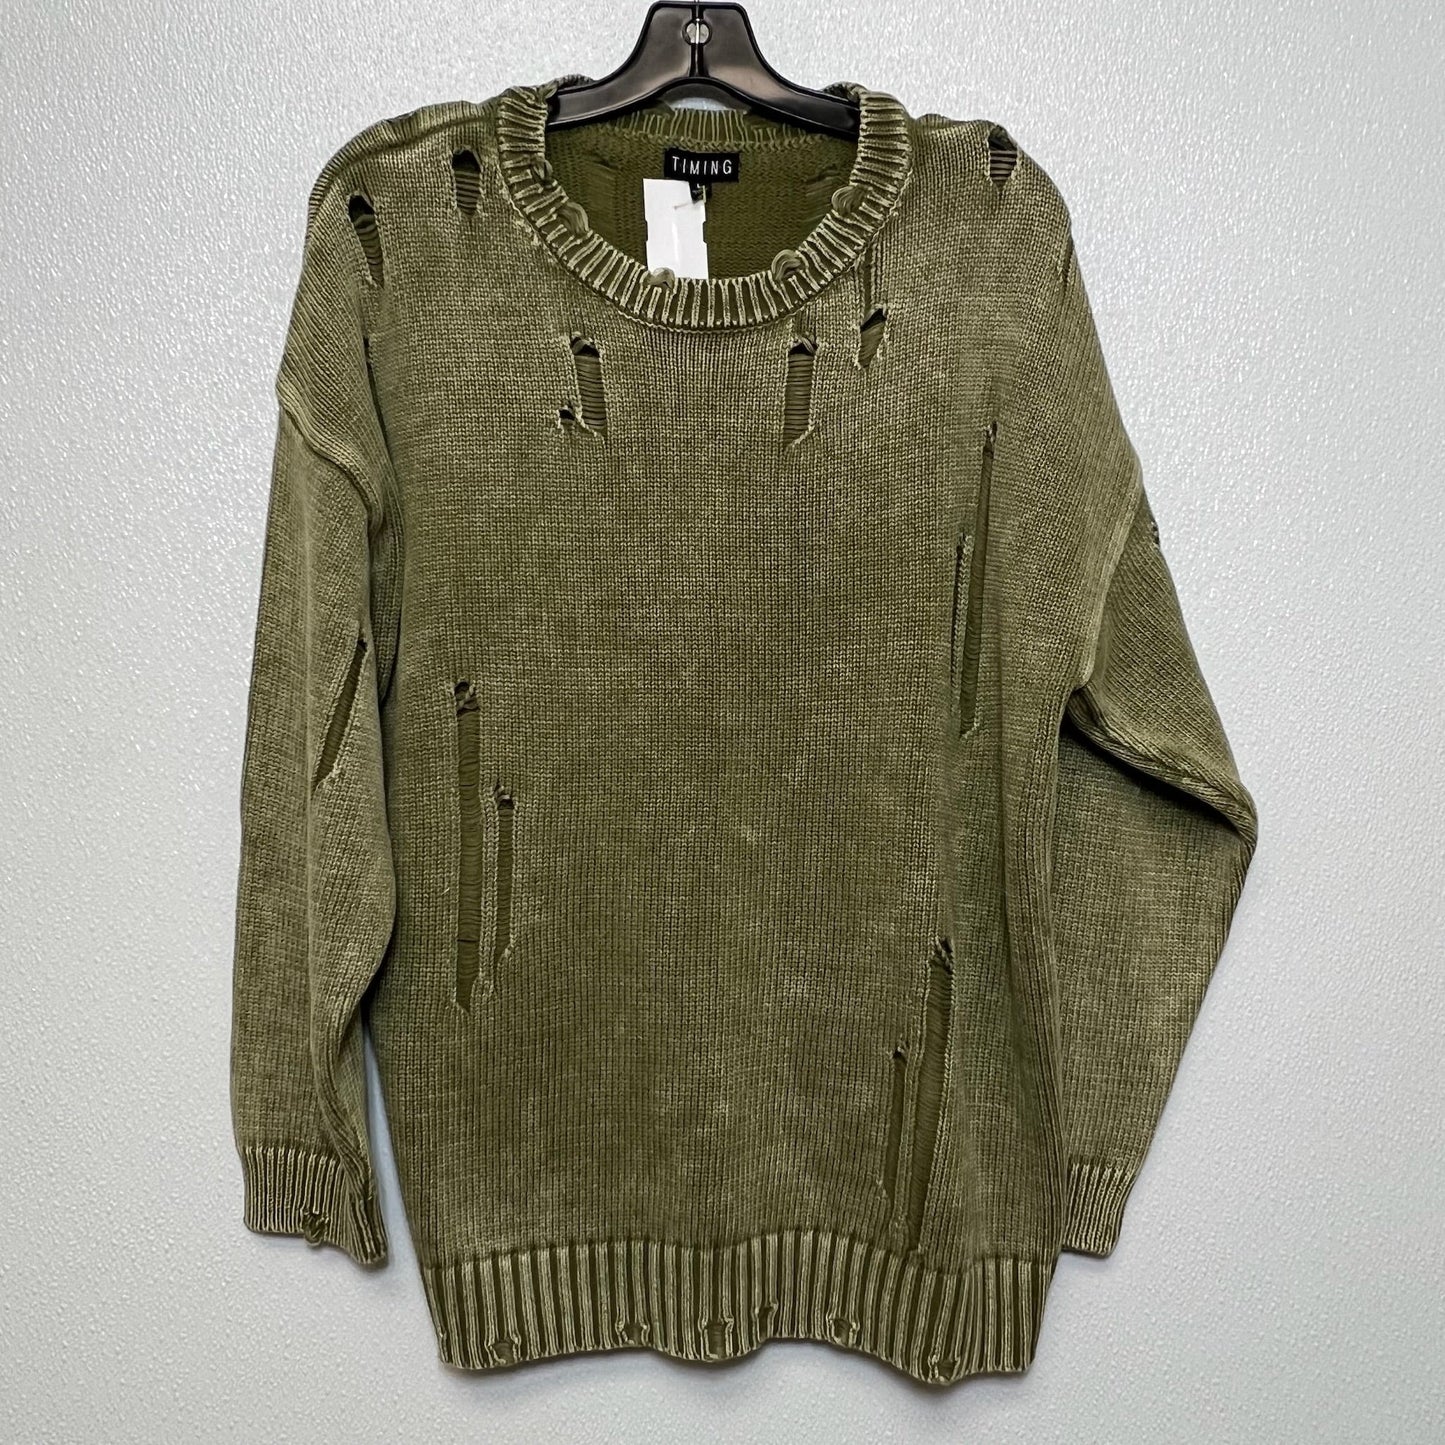 Sweater By Timing  Size: L